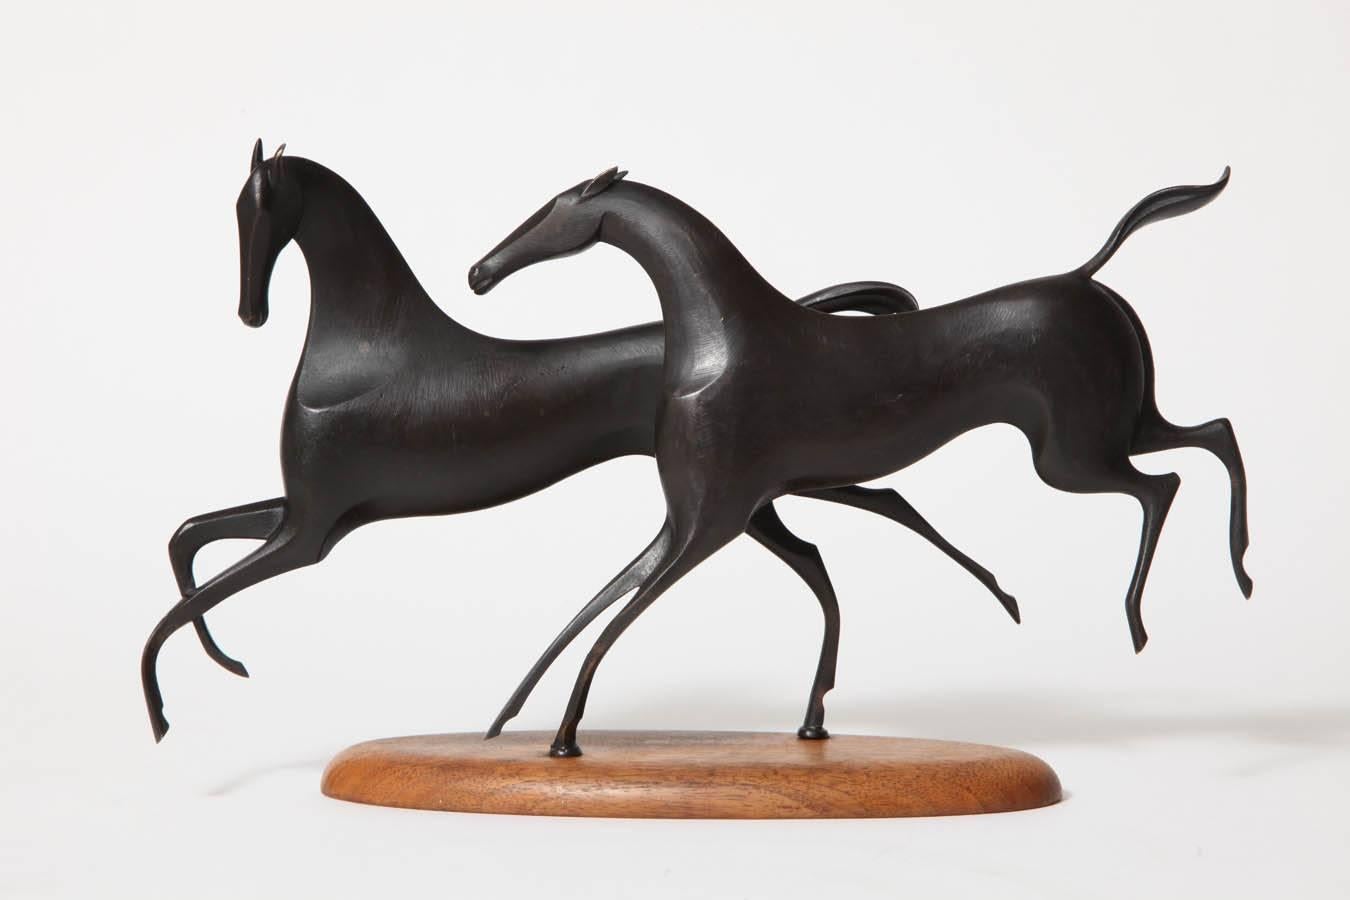 A pair of Karl Hagenauer prancing horses. Black patinated bronze Horses on an oval wood base, Mint condition, circa 1950. Marked on underside of wooden oval base, WHW (Werkstätte Hagenauer Wien), Made in Austria, Handmade.